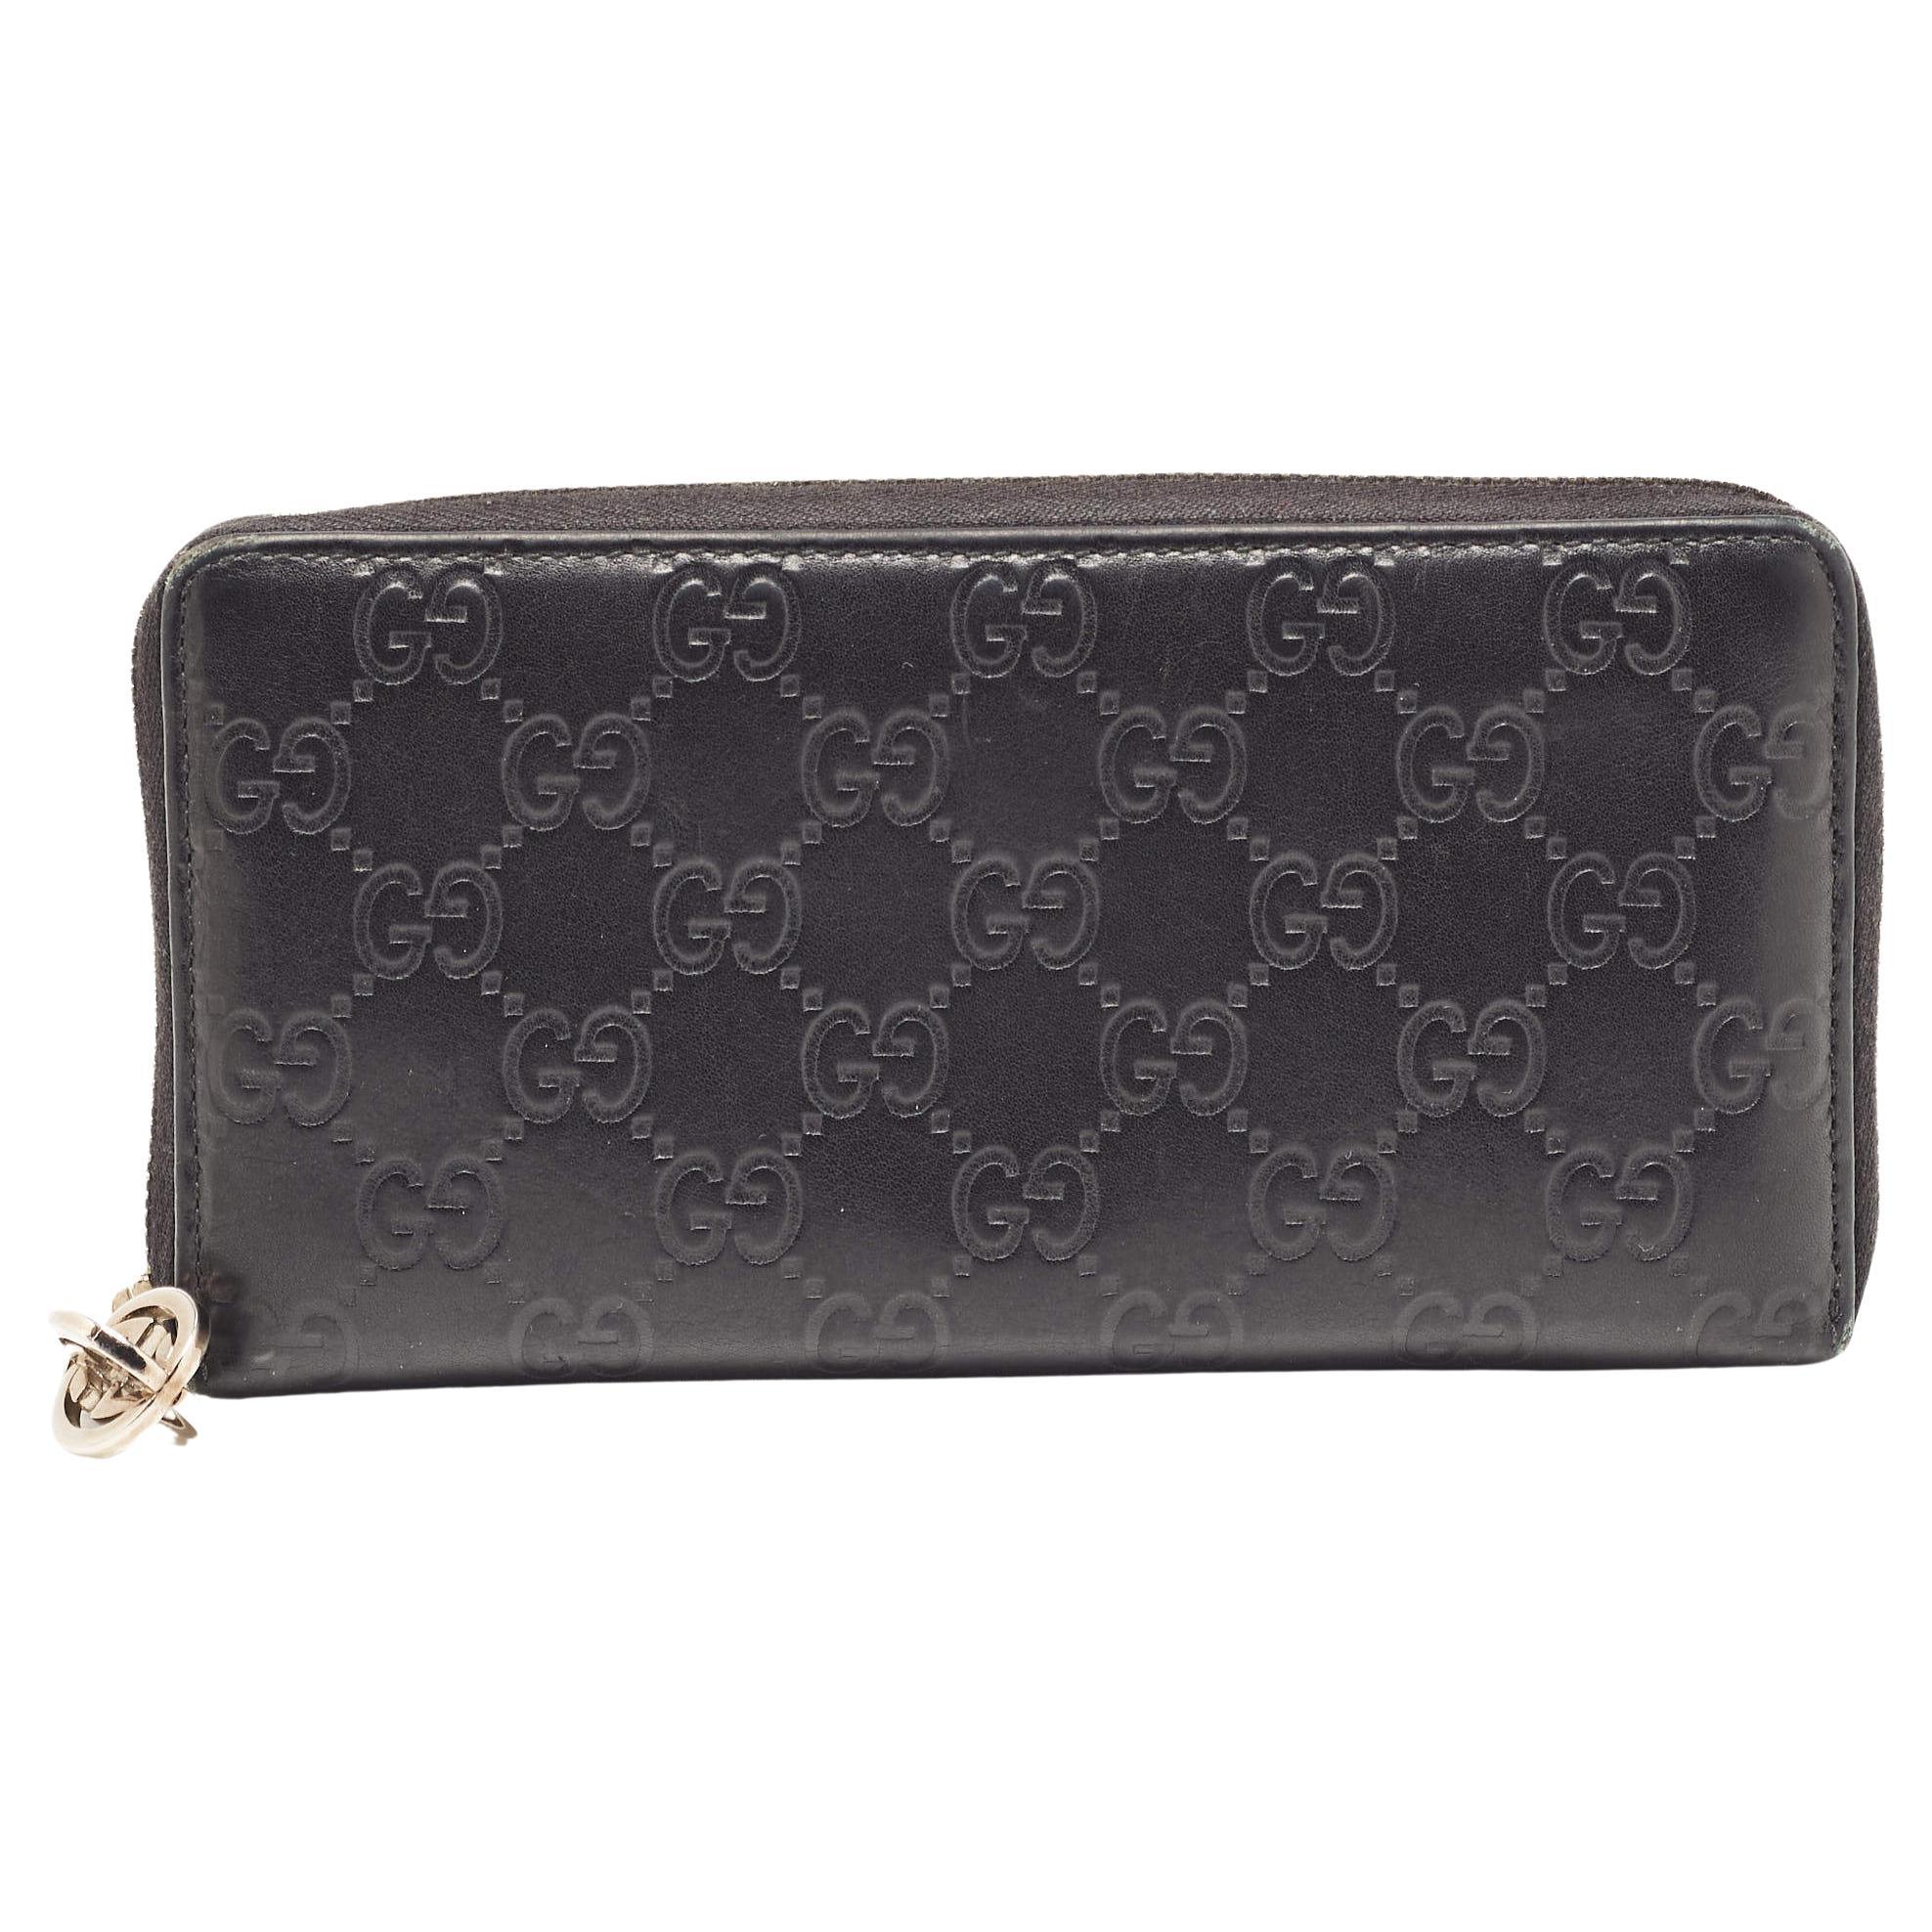 Gucci Back Guccissima Leather Zip Around Wallet